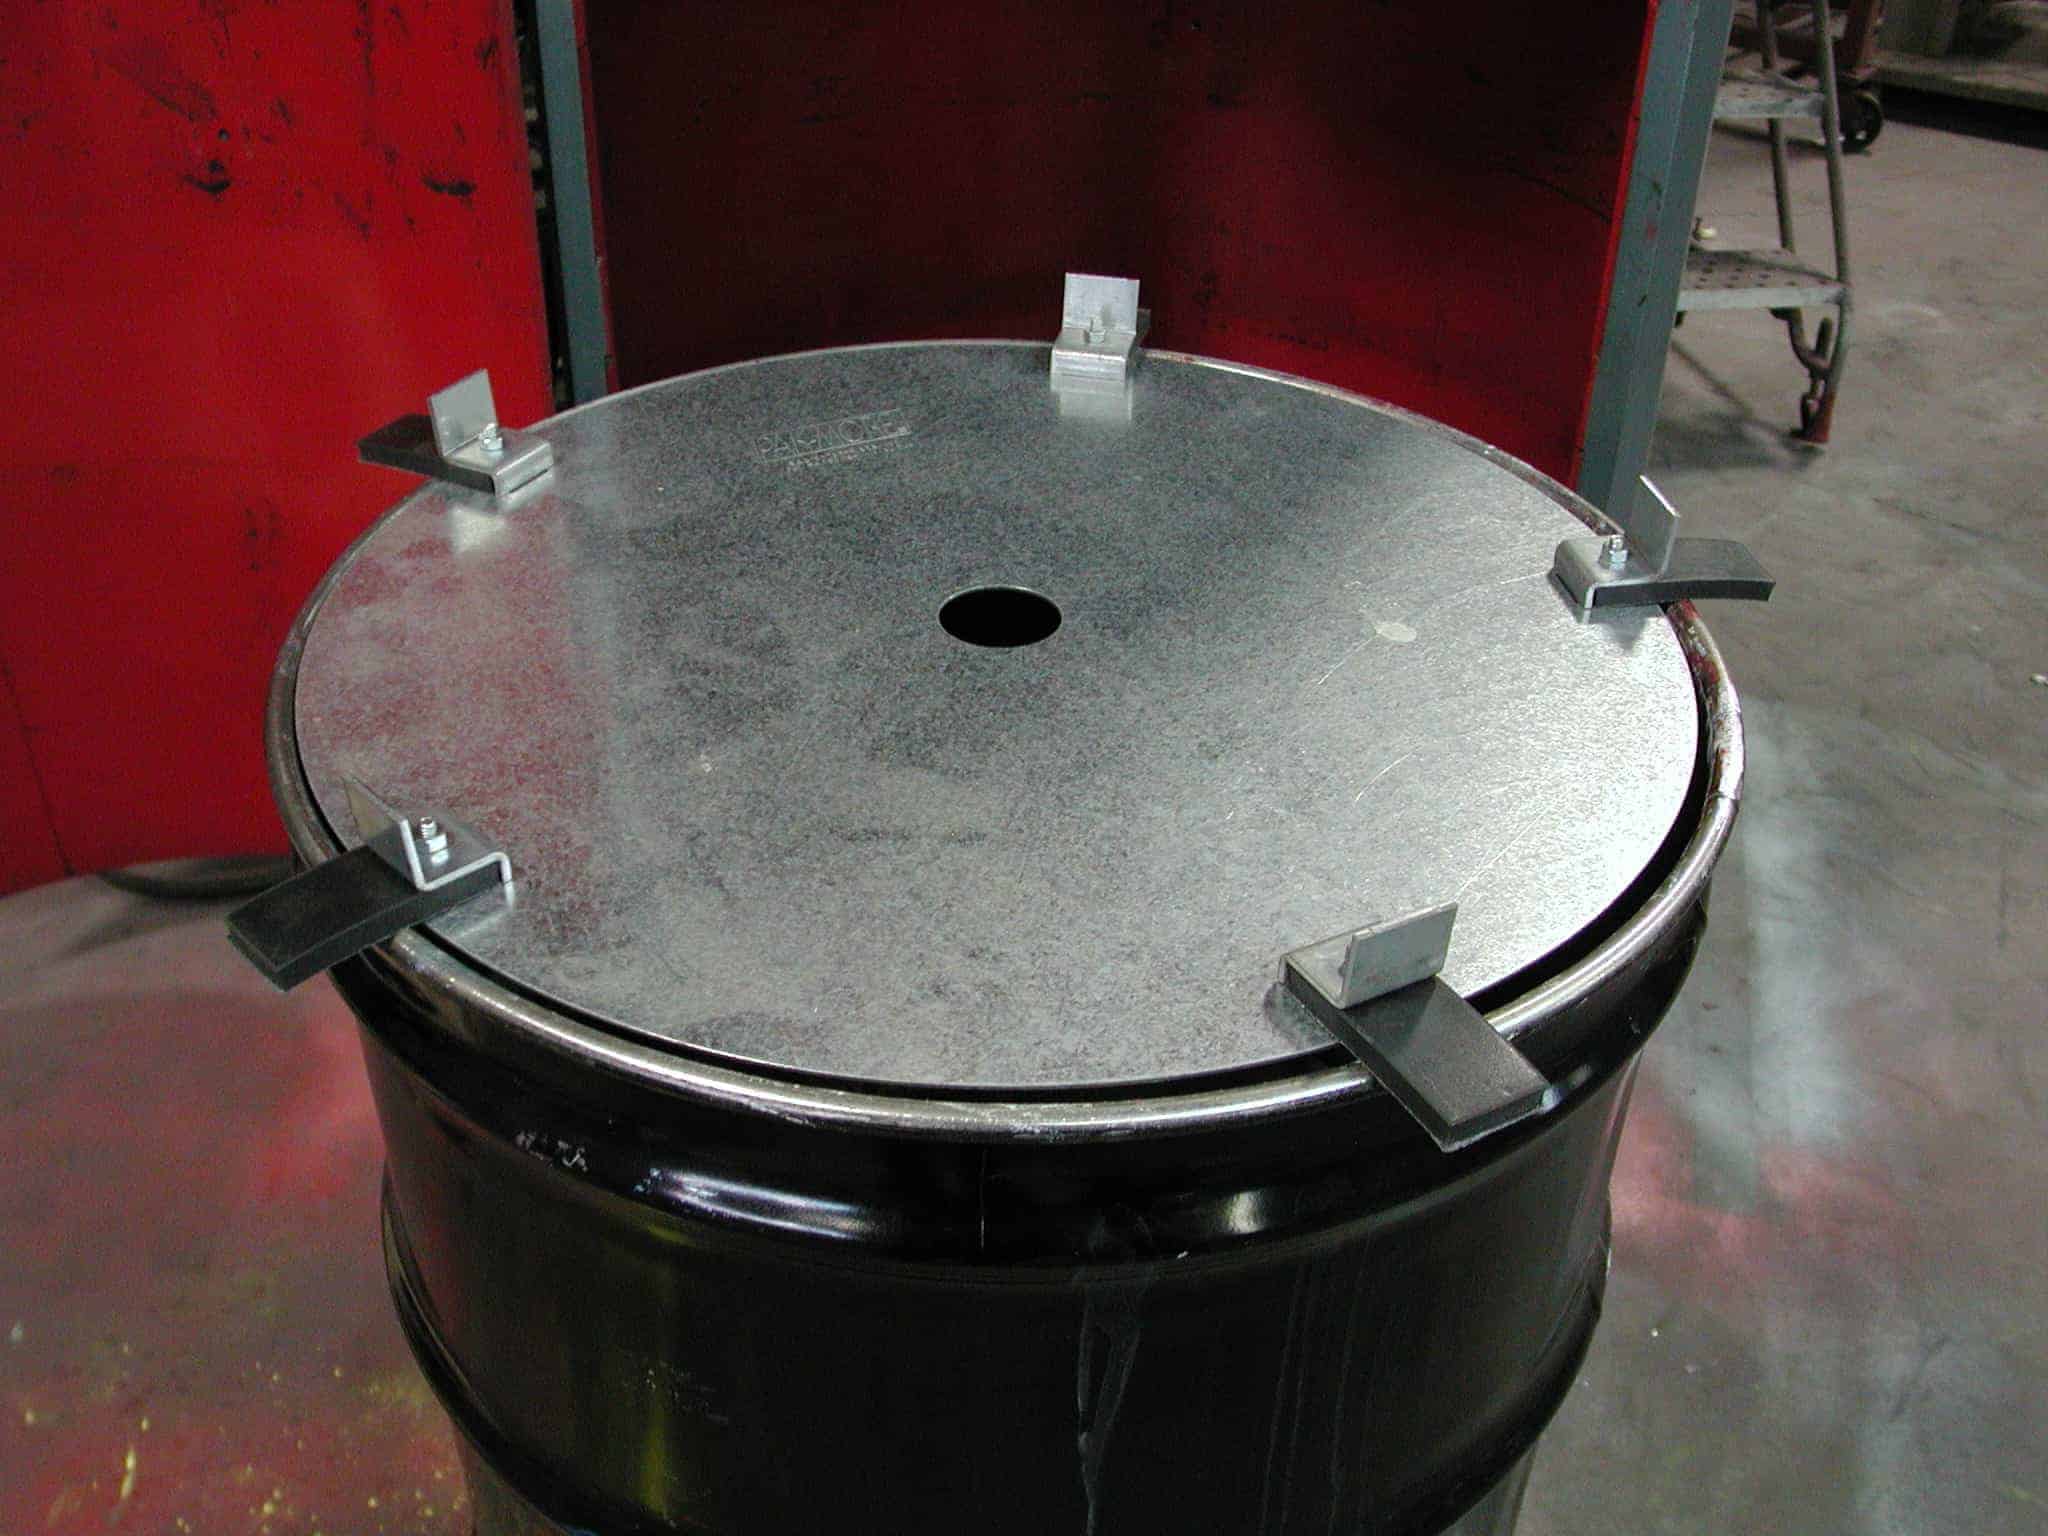 Pak-More Hold-Down Disks prevent waste springback. Lower Drum Compacting Costs. Hazardous Waste Disposal Costs